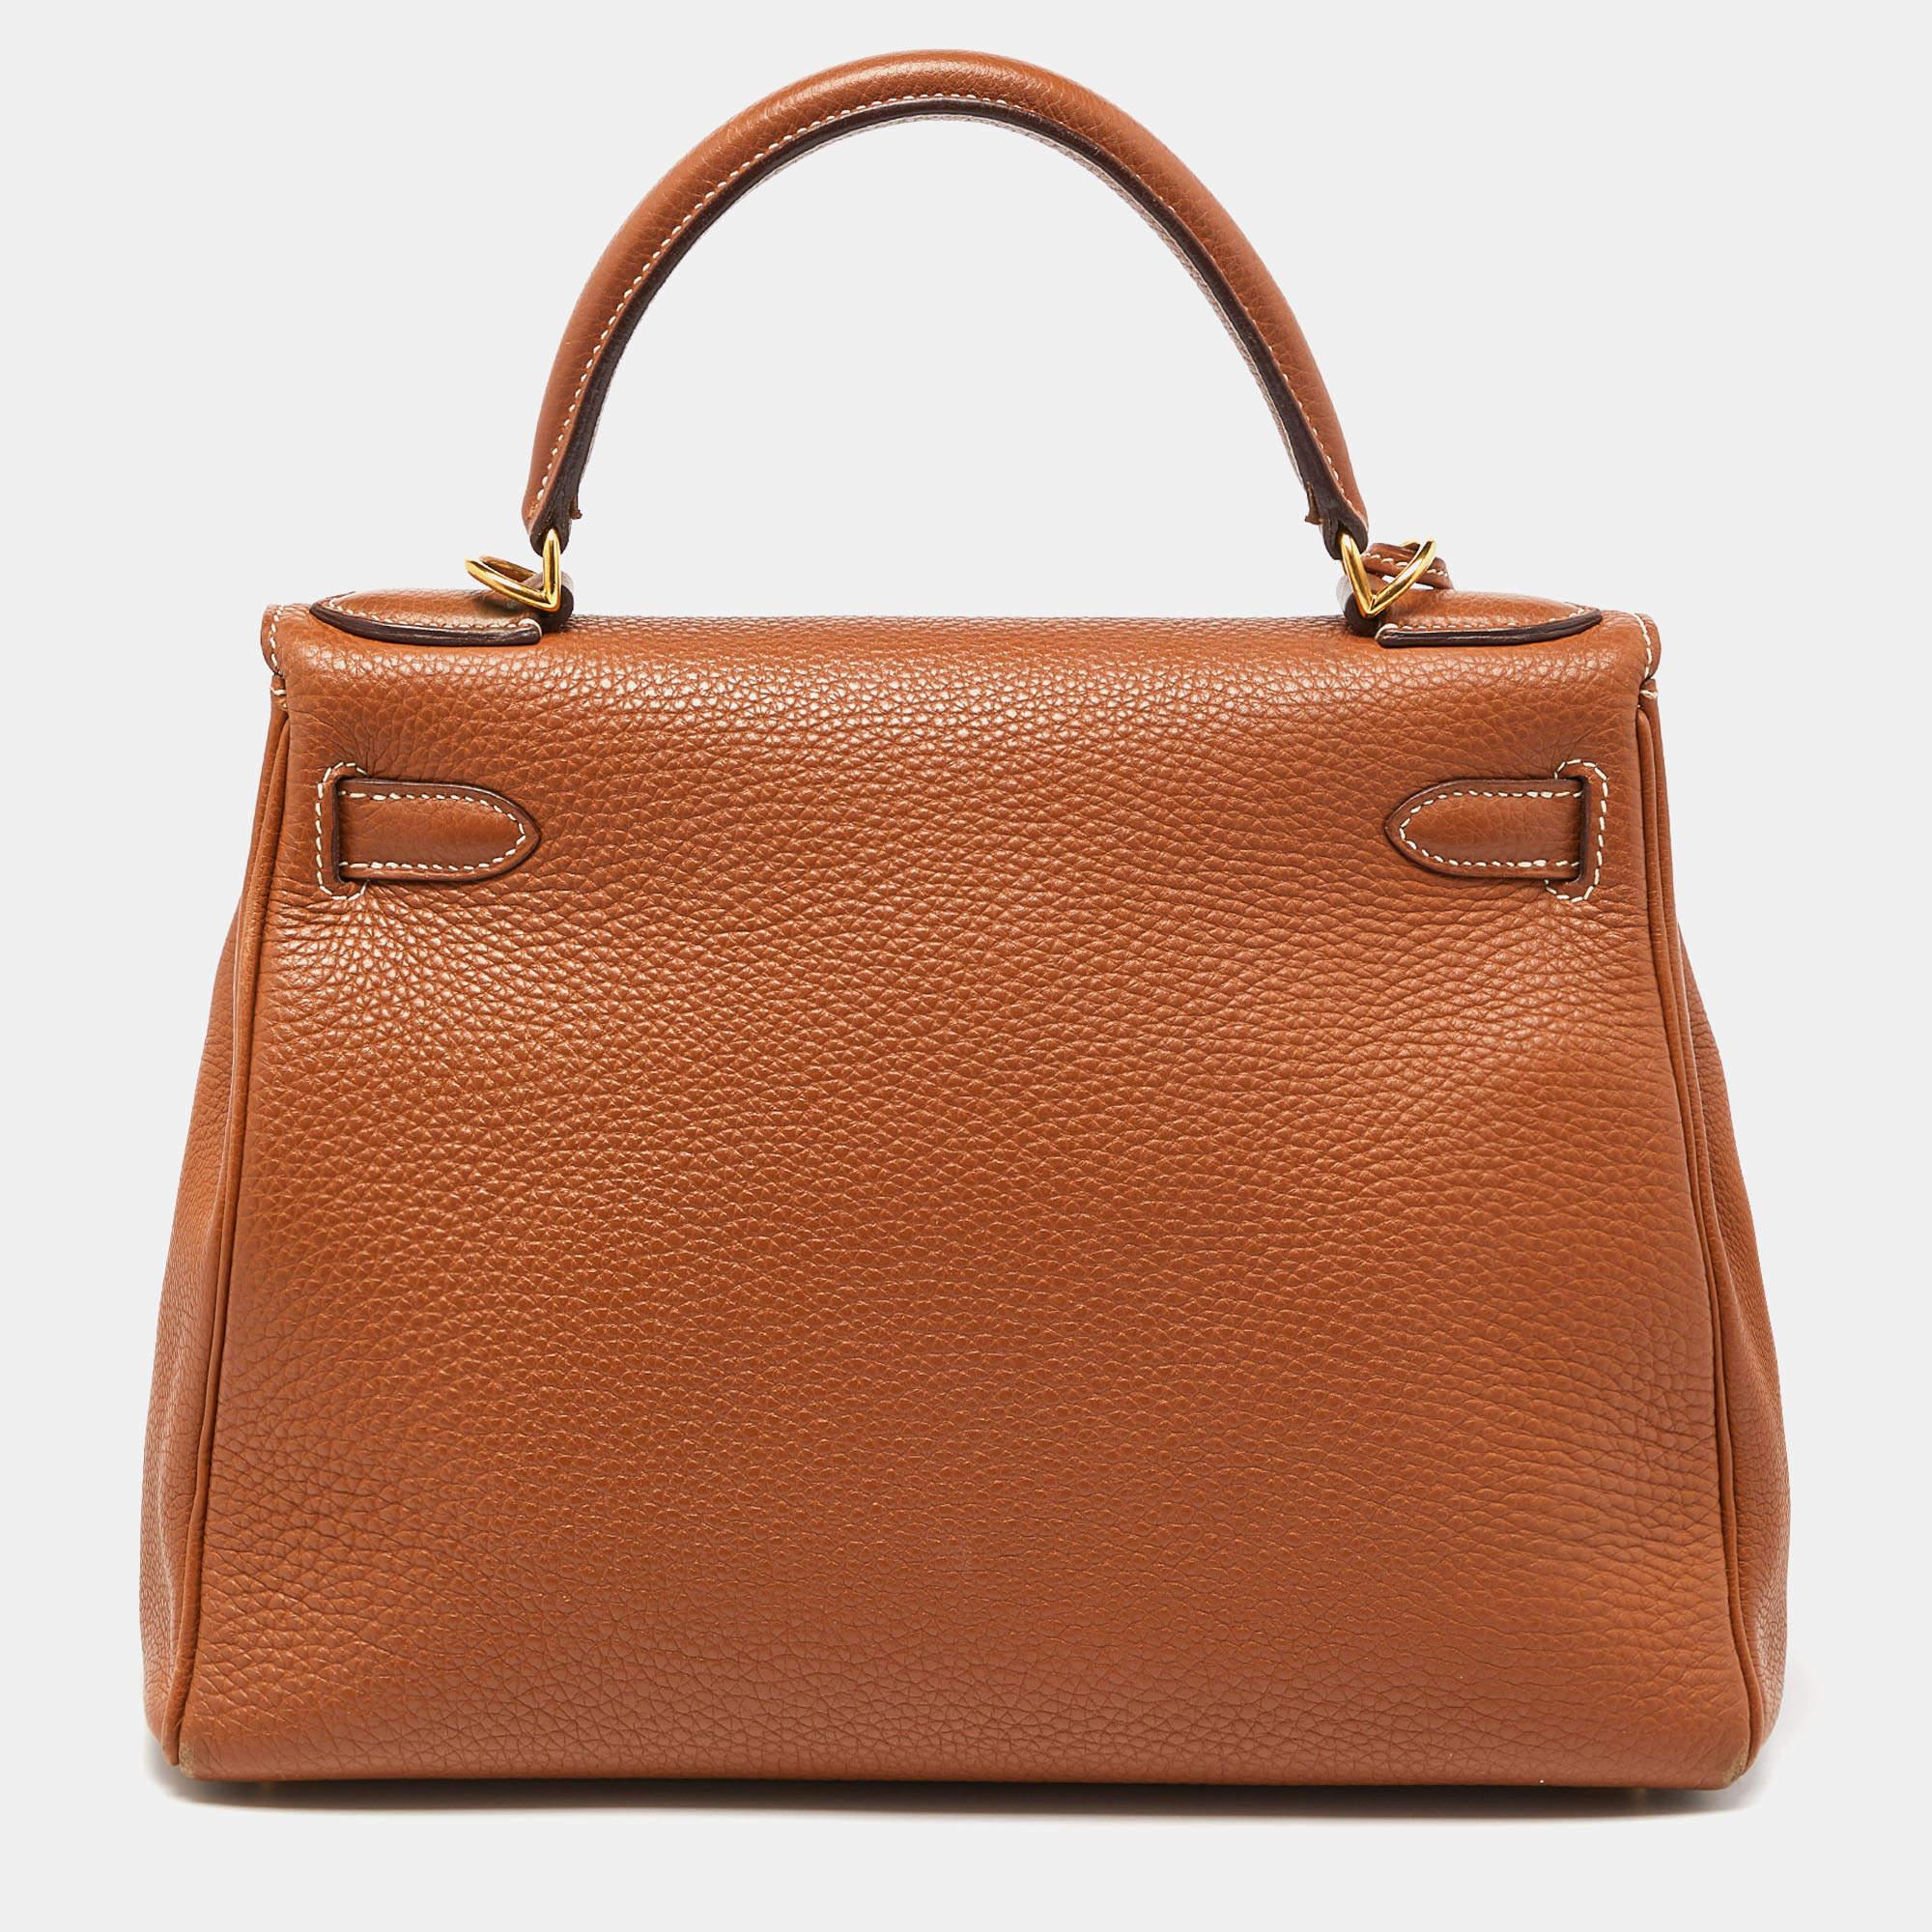 Inspired by none other than Grace Kelly of Monaco, Hermes Kelly is carefully handstitched to perfection. This Kelly Retourne is crafted from Taurillion Clemence leather and has gold-finish hardware. Retourne has a more casual look and is stitched on